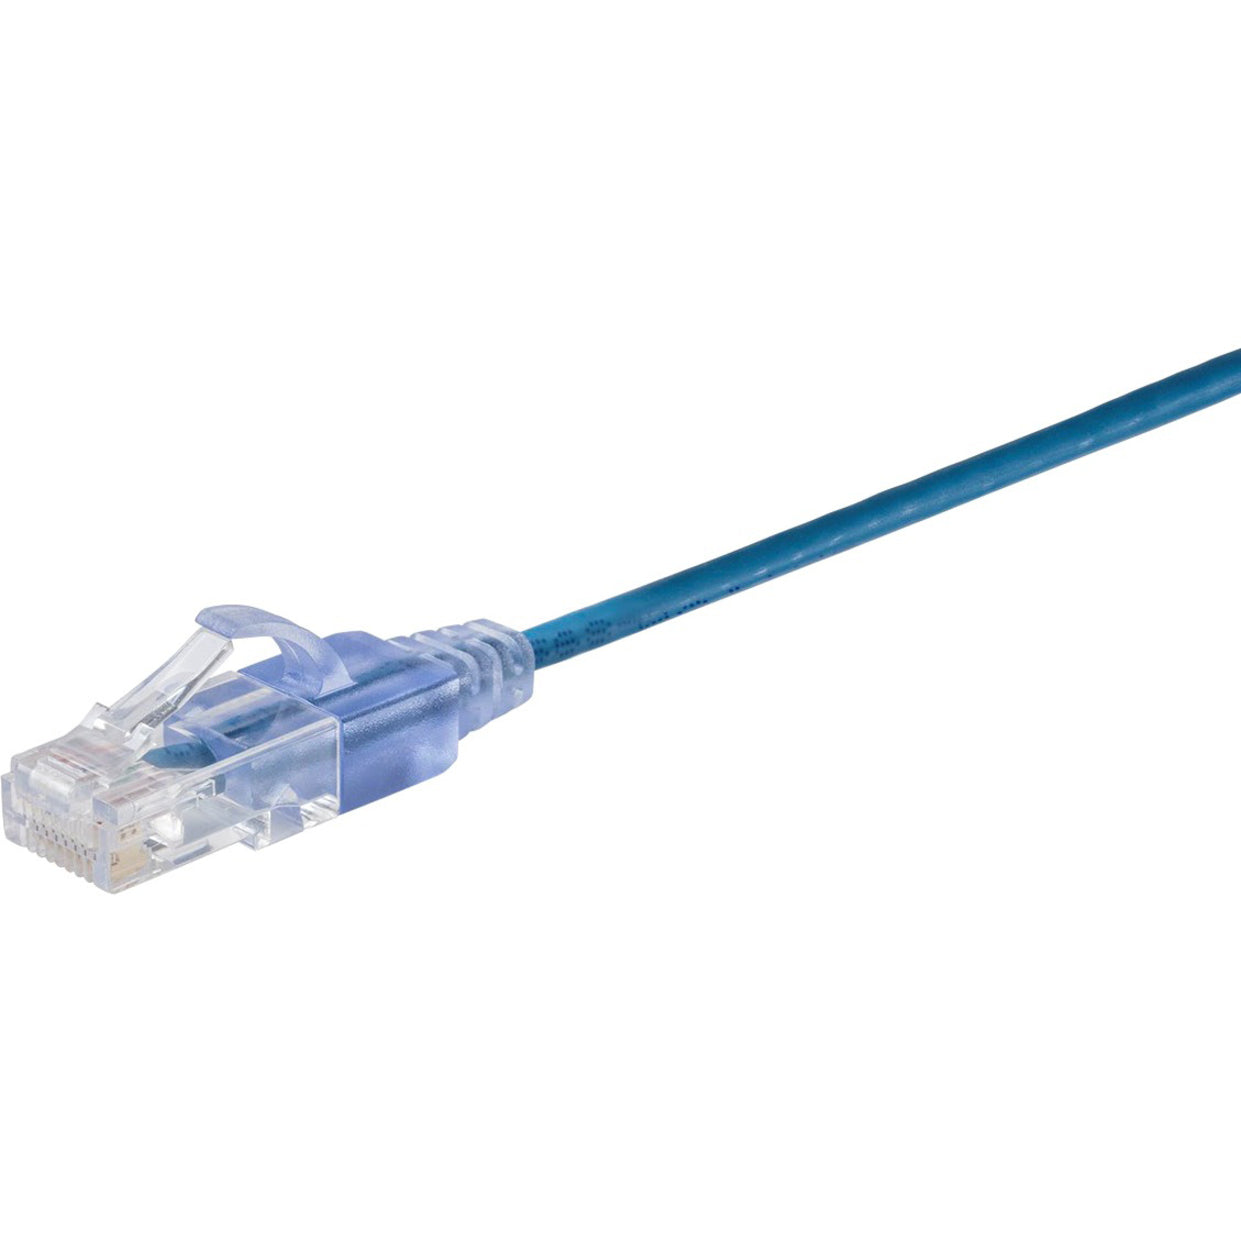 Monoprice 15158 SlimRun Cat6A Ethernet Network Patch Cable 5ft Blue 10-Pack モノプライス 15158 SlimRun Cat6A イーサネットネットワークパッチケーブル 5ft ブルー、10パック